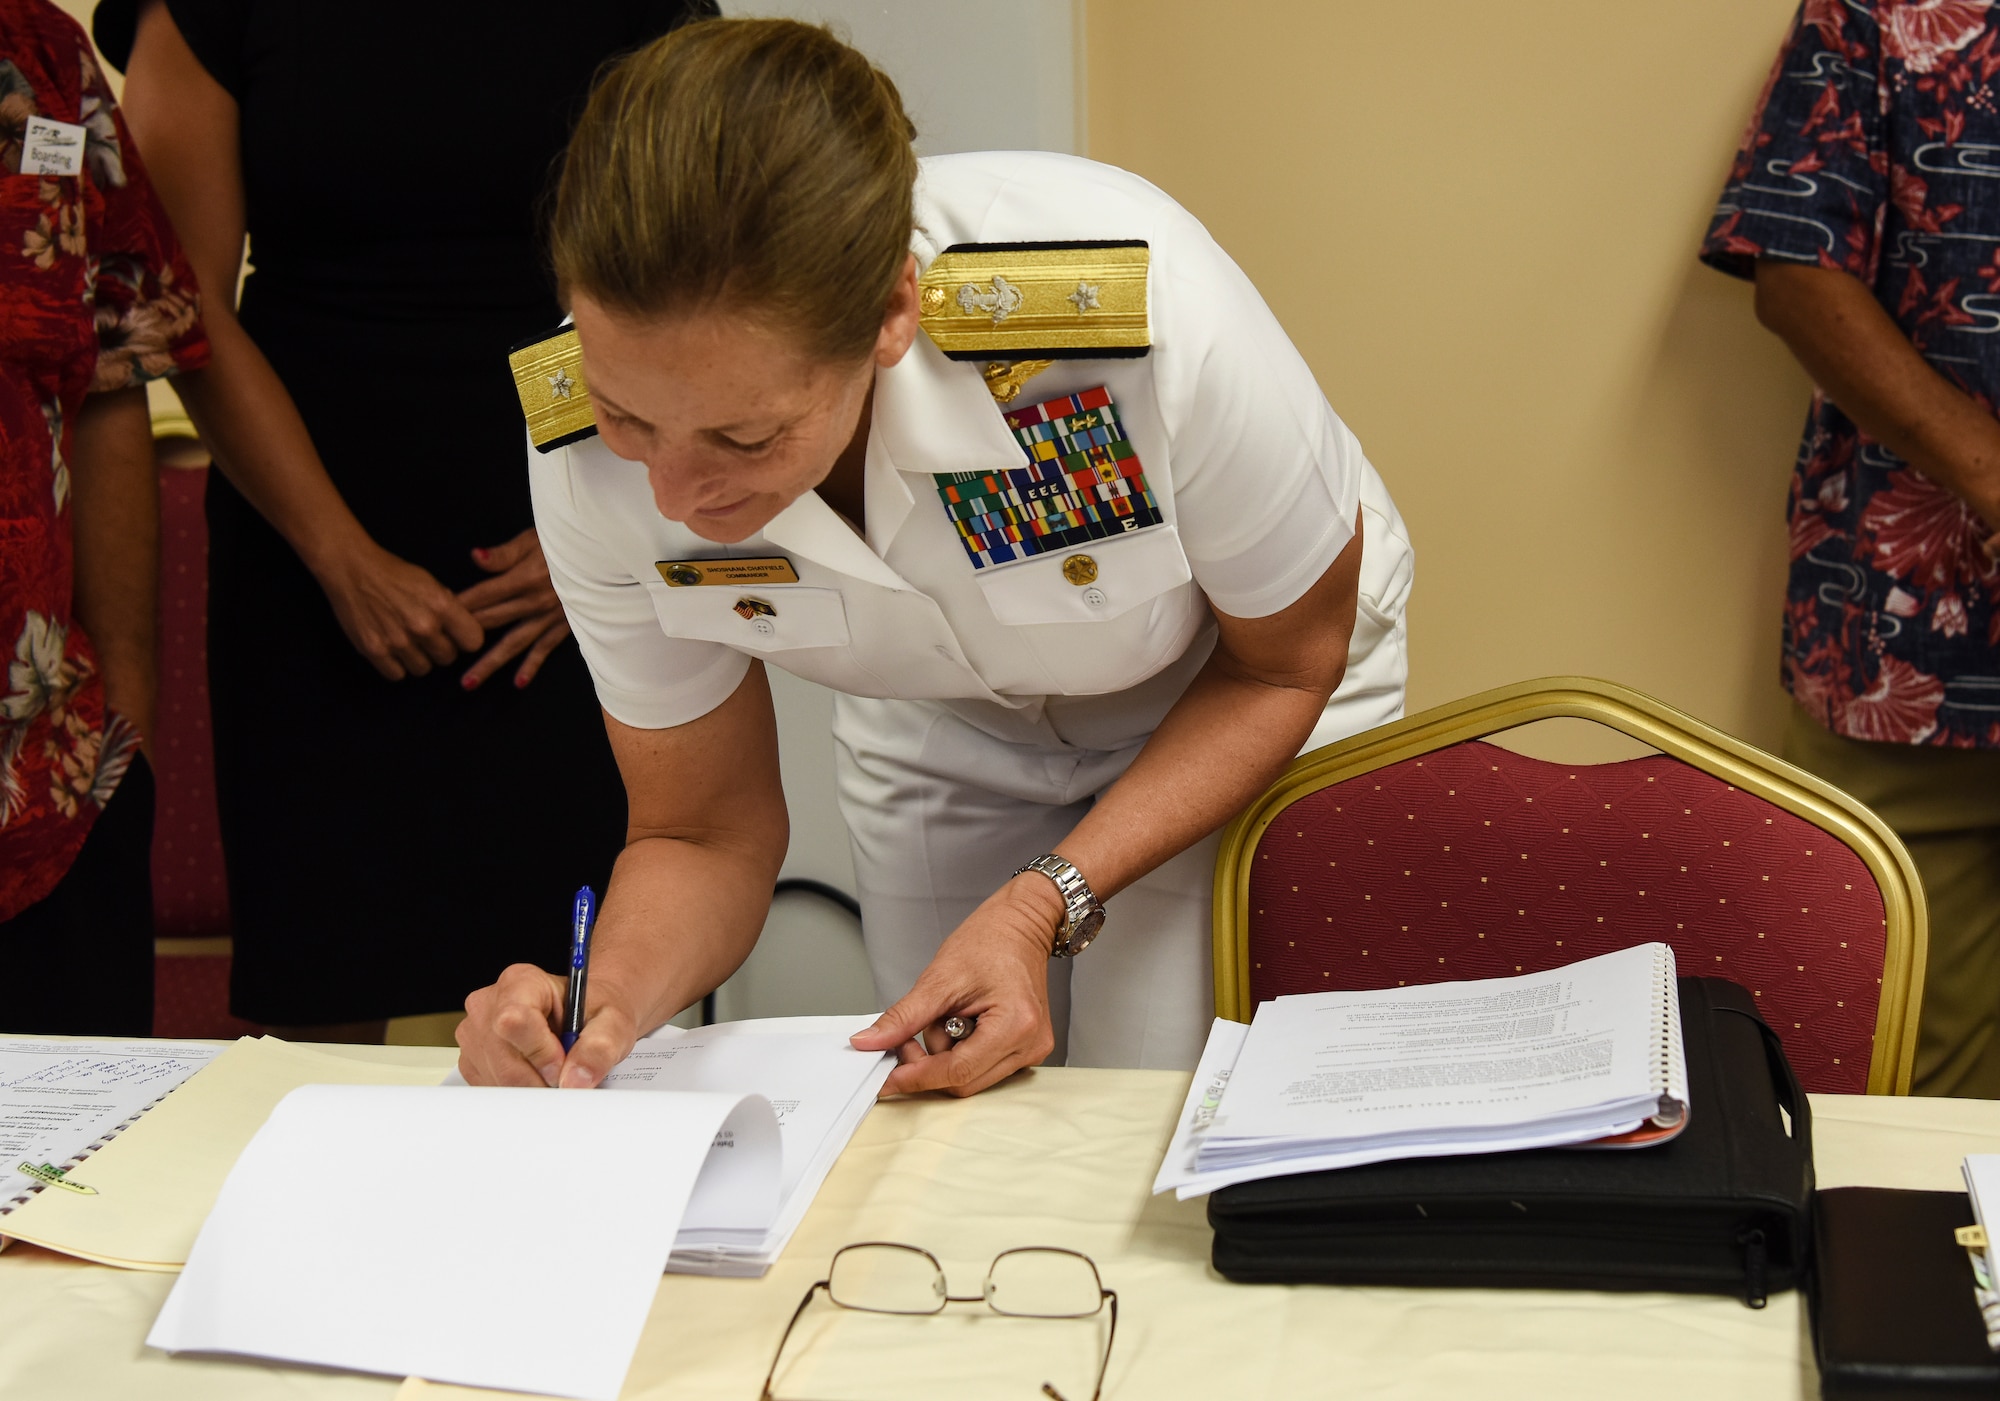 Rear. Adm. Shoshana Chatfield, Joint Region Marianas commander, signs the Tinian Divert airfield lease May 3, 2019, at Tinian Airport, Commonwealth of the Northern Mariana Islands. The $21.9 million lease signing was the culmination of nearly five years of negotiations between the Department of Defense, CNMI government, and Commonwealth Port Authority. (U.S. Air Force photo by Tech. Sgt. Jake Barreiro)